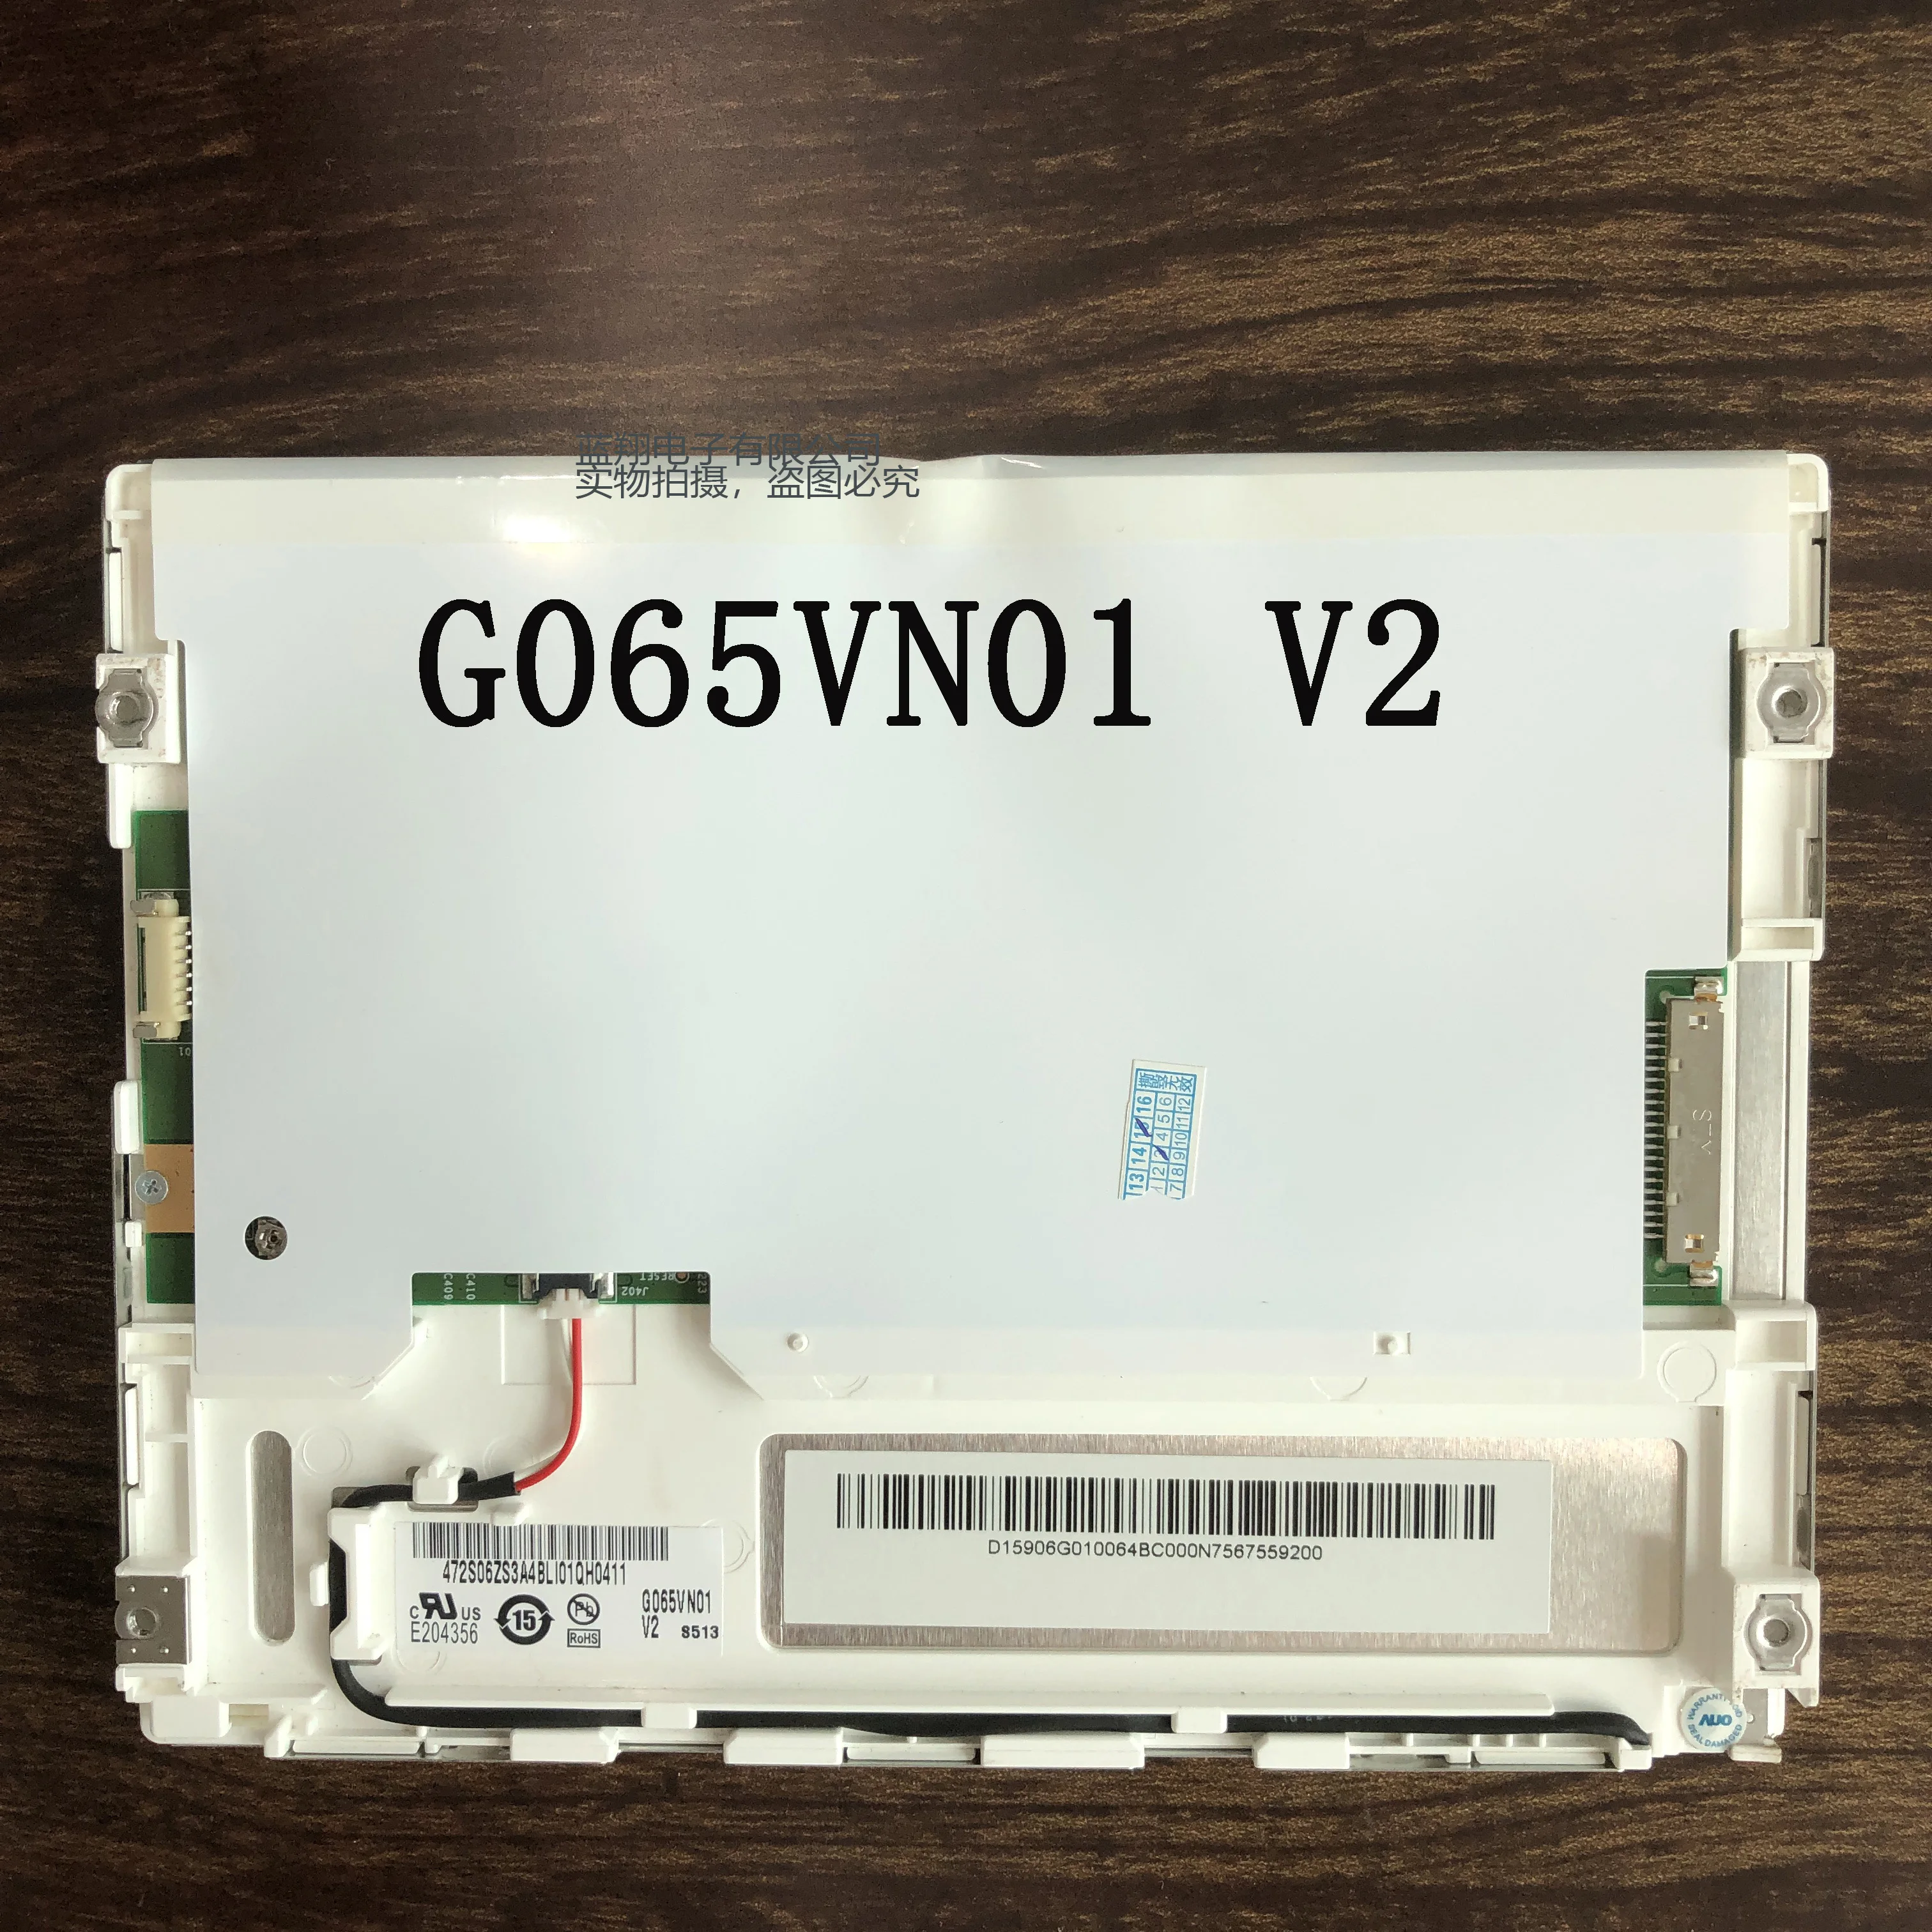 Free Shipping New Grade A+ 6.5 inch LCD Display Screen Panel For AUO G065VN01 V.2 G065VN01 V2